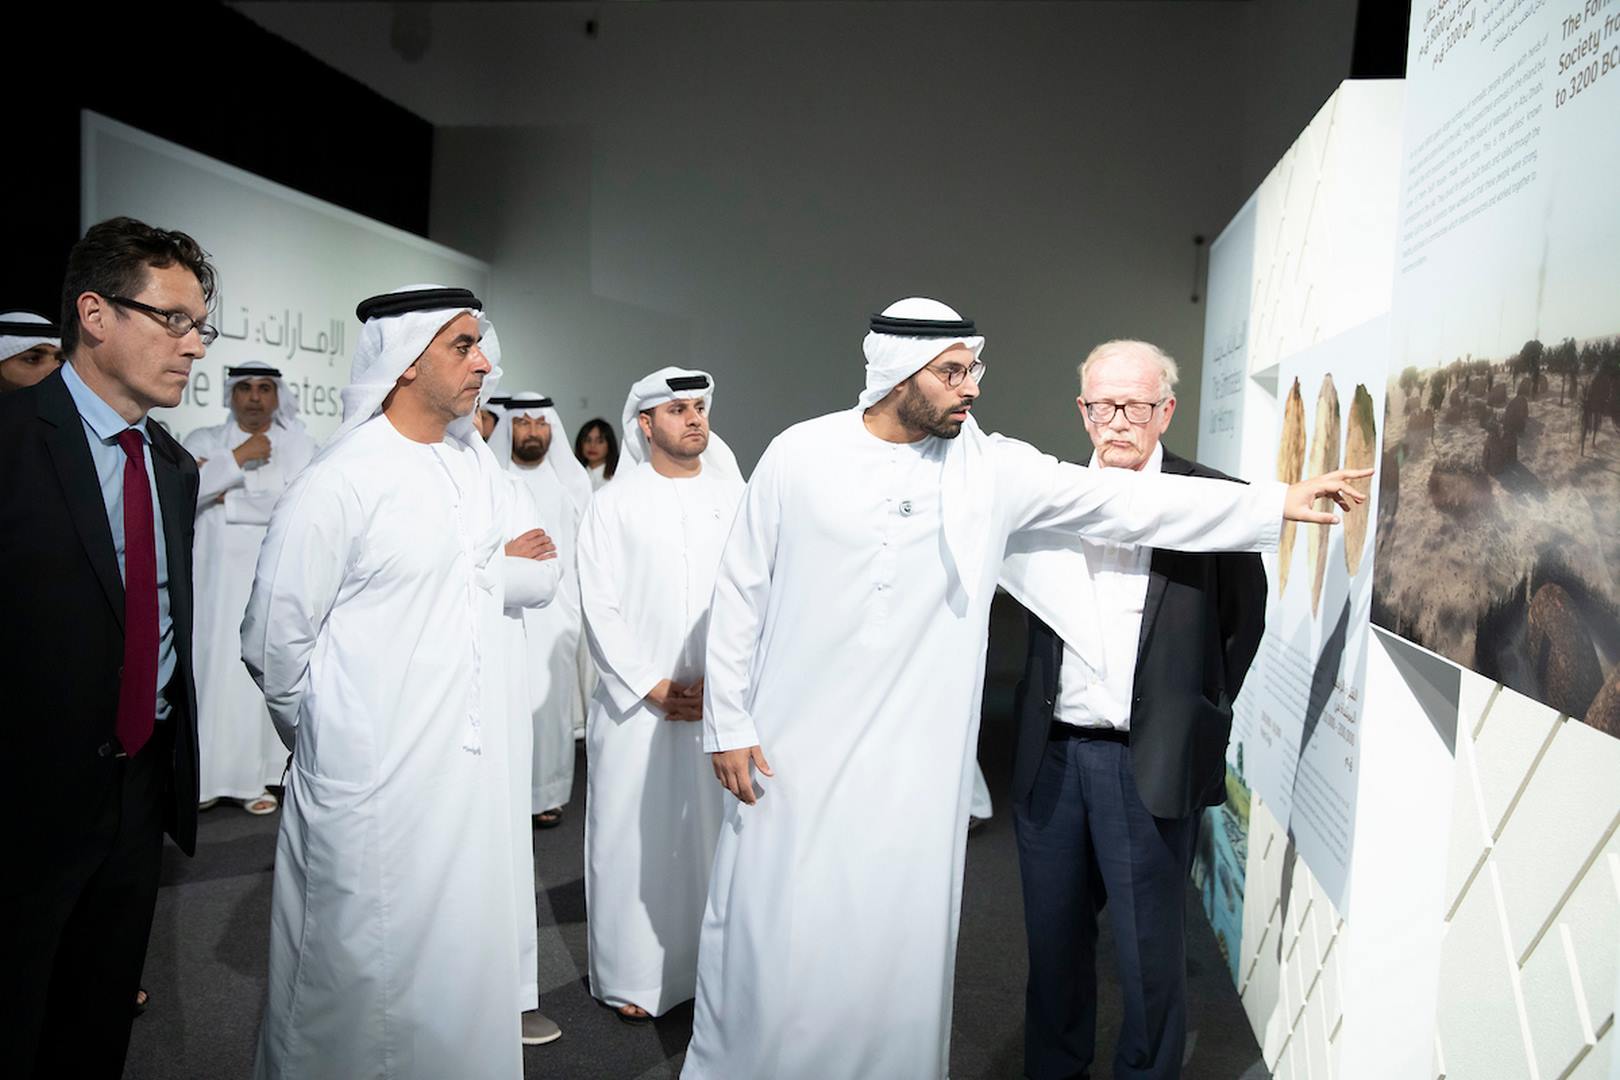 LAUNCHES PILOT PHASE FOR TEACHING THE ‘UAE - OUR HISTORY’ BOOK IN SCHOOLS